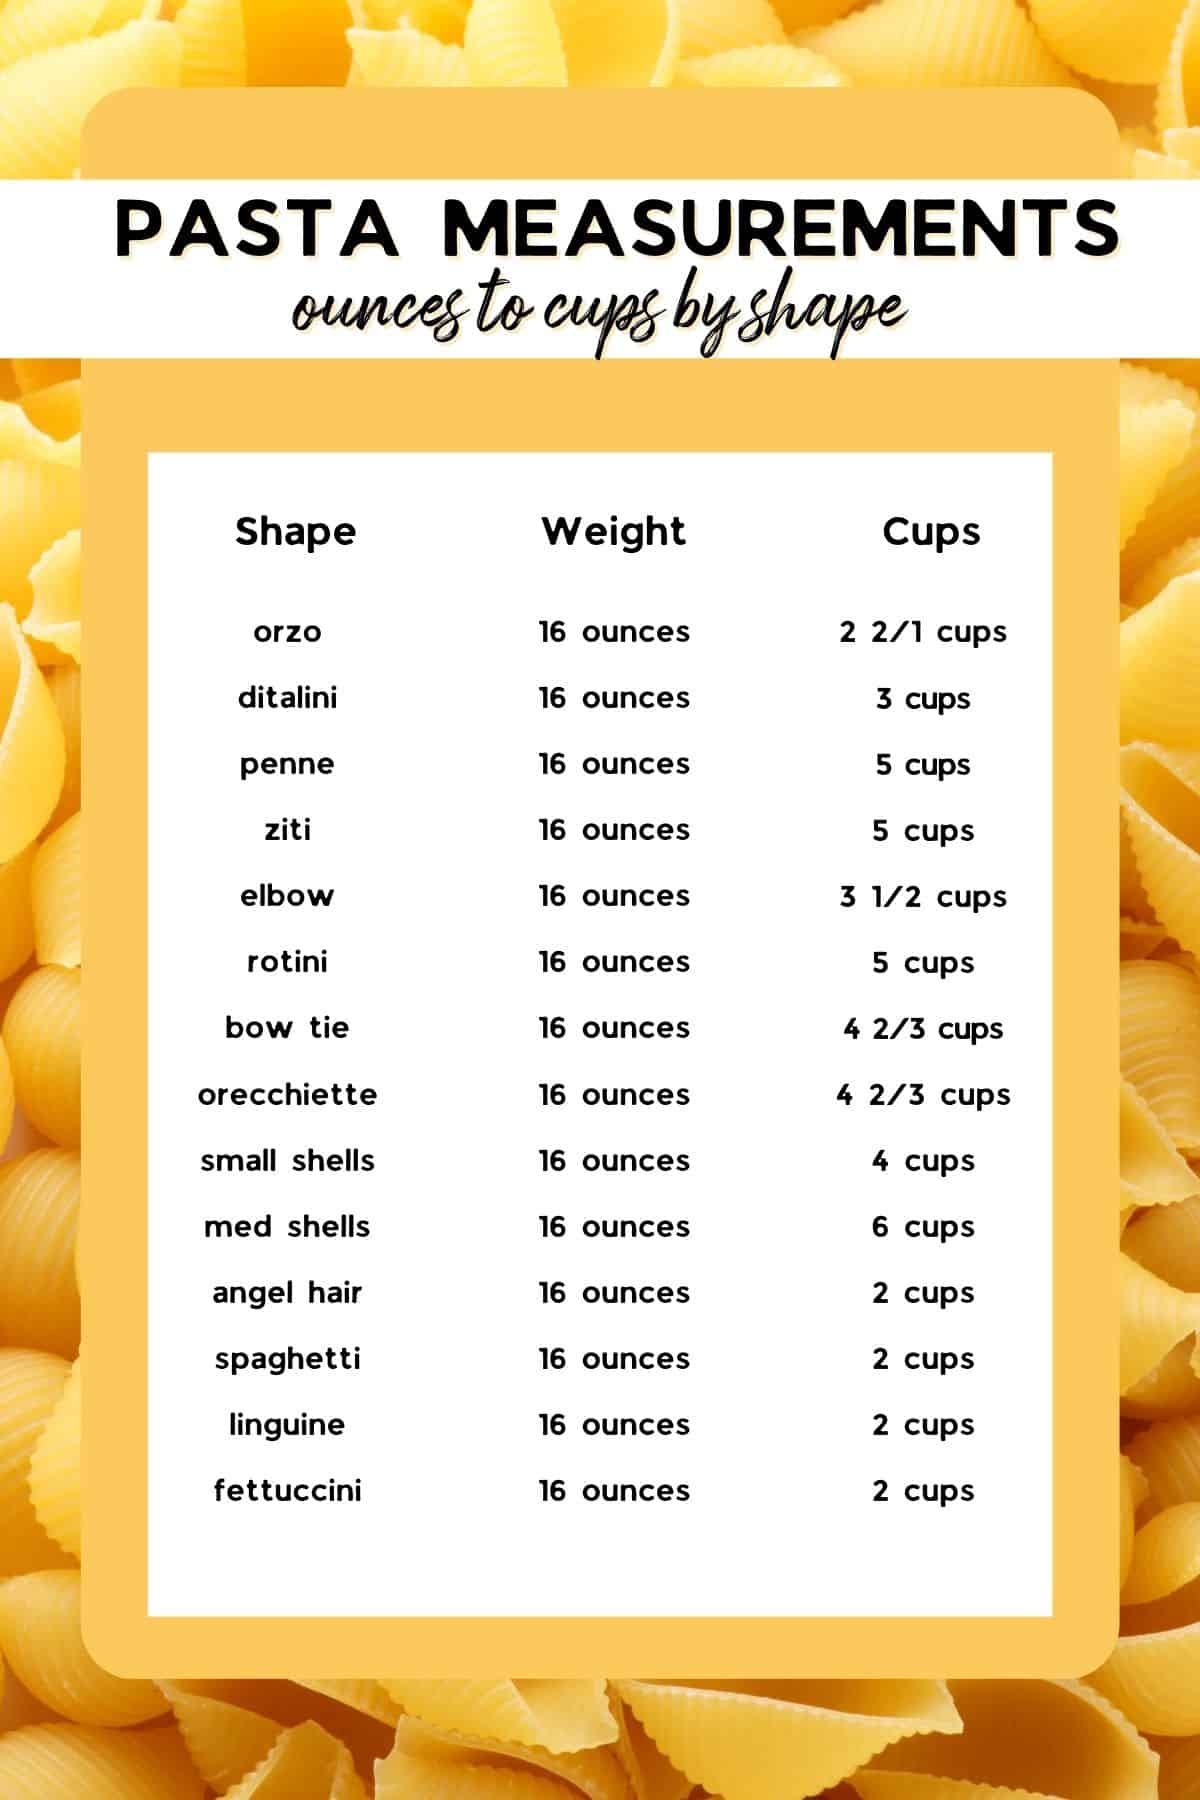 conversion table for 16 ounces of dry pasta equal how many cups